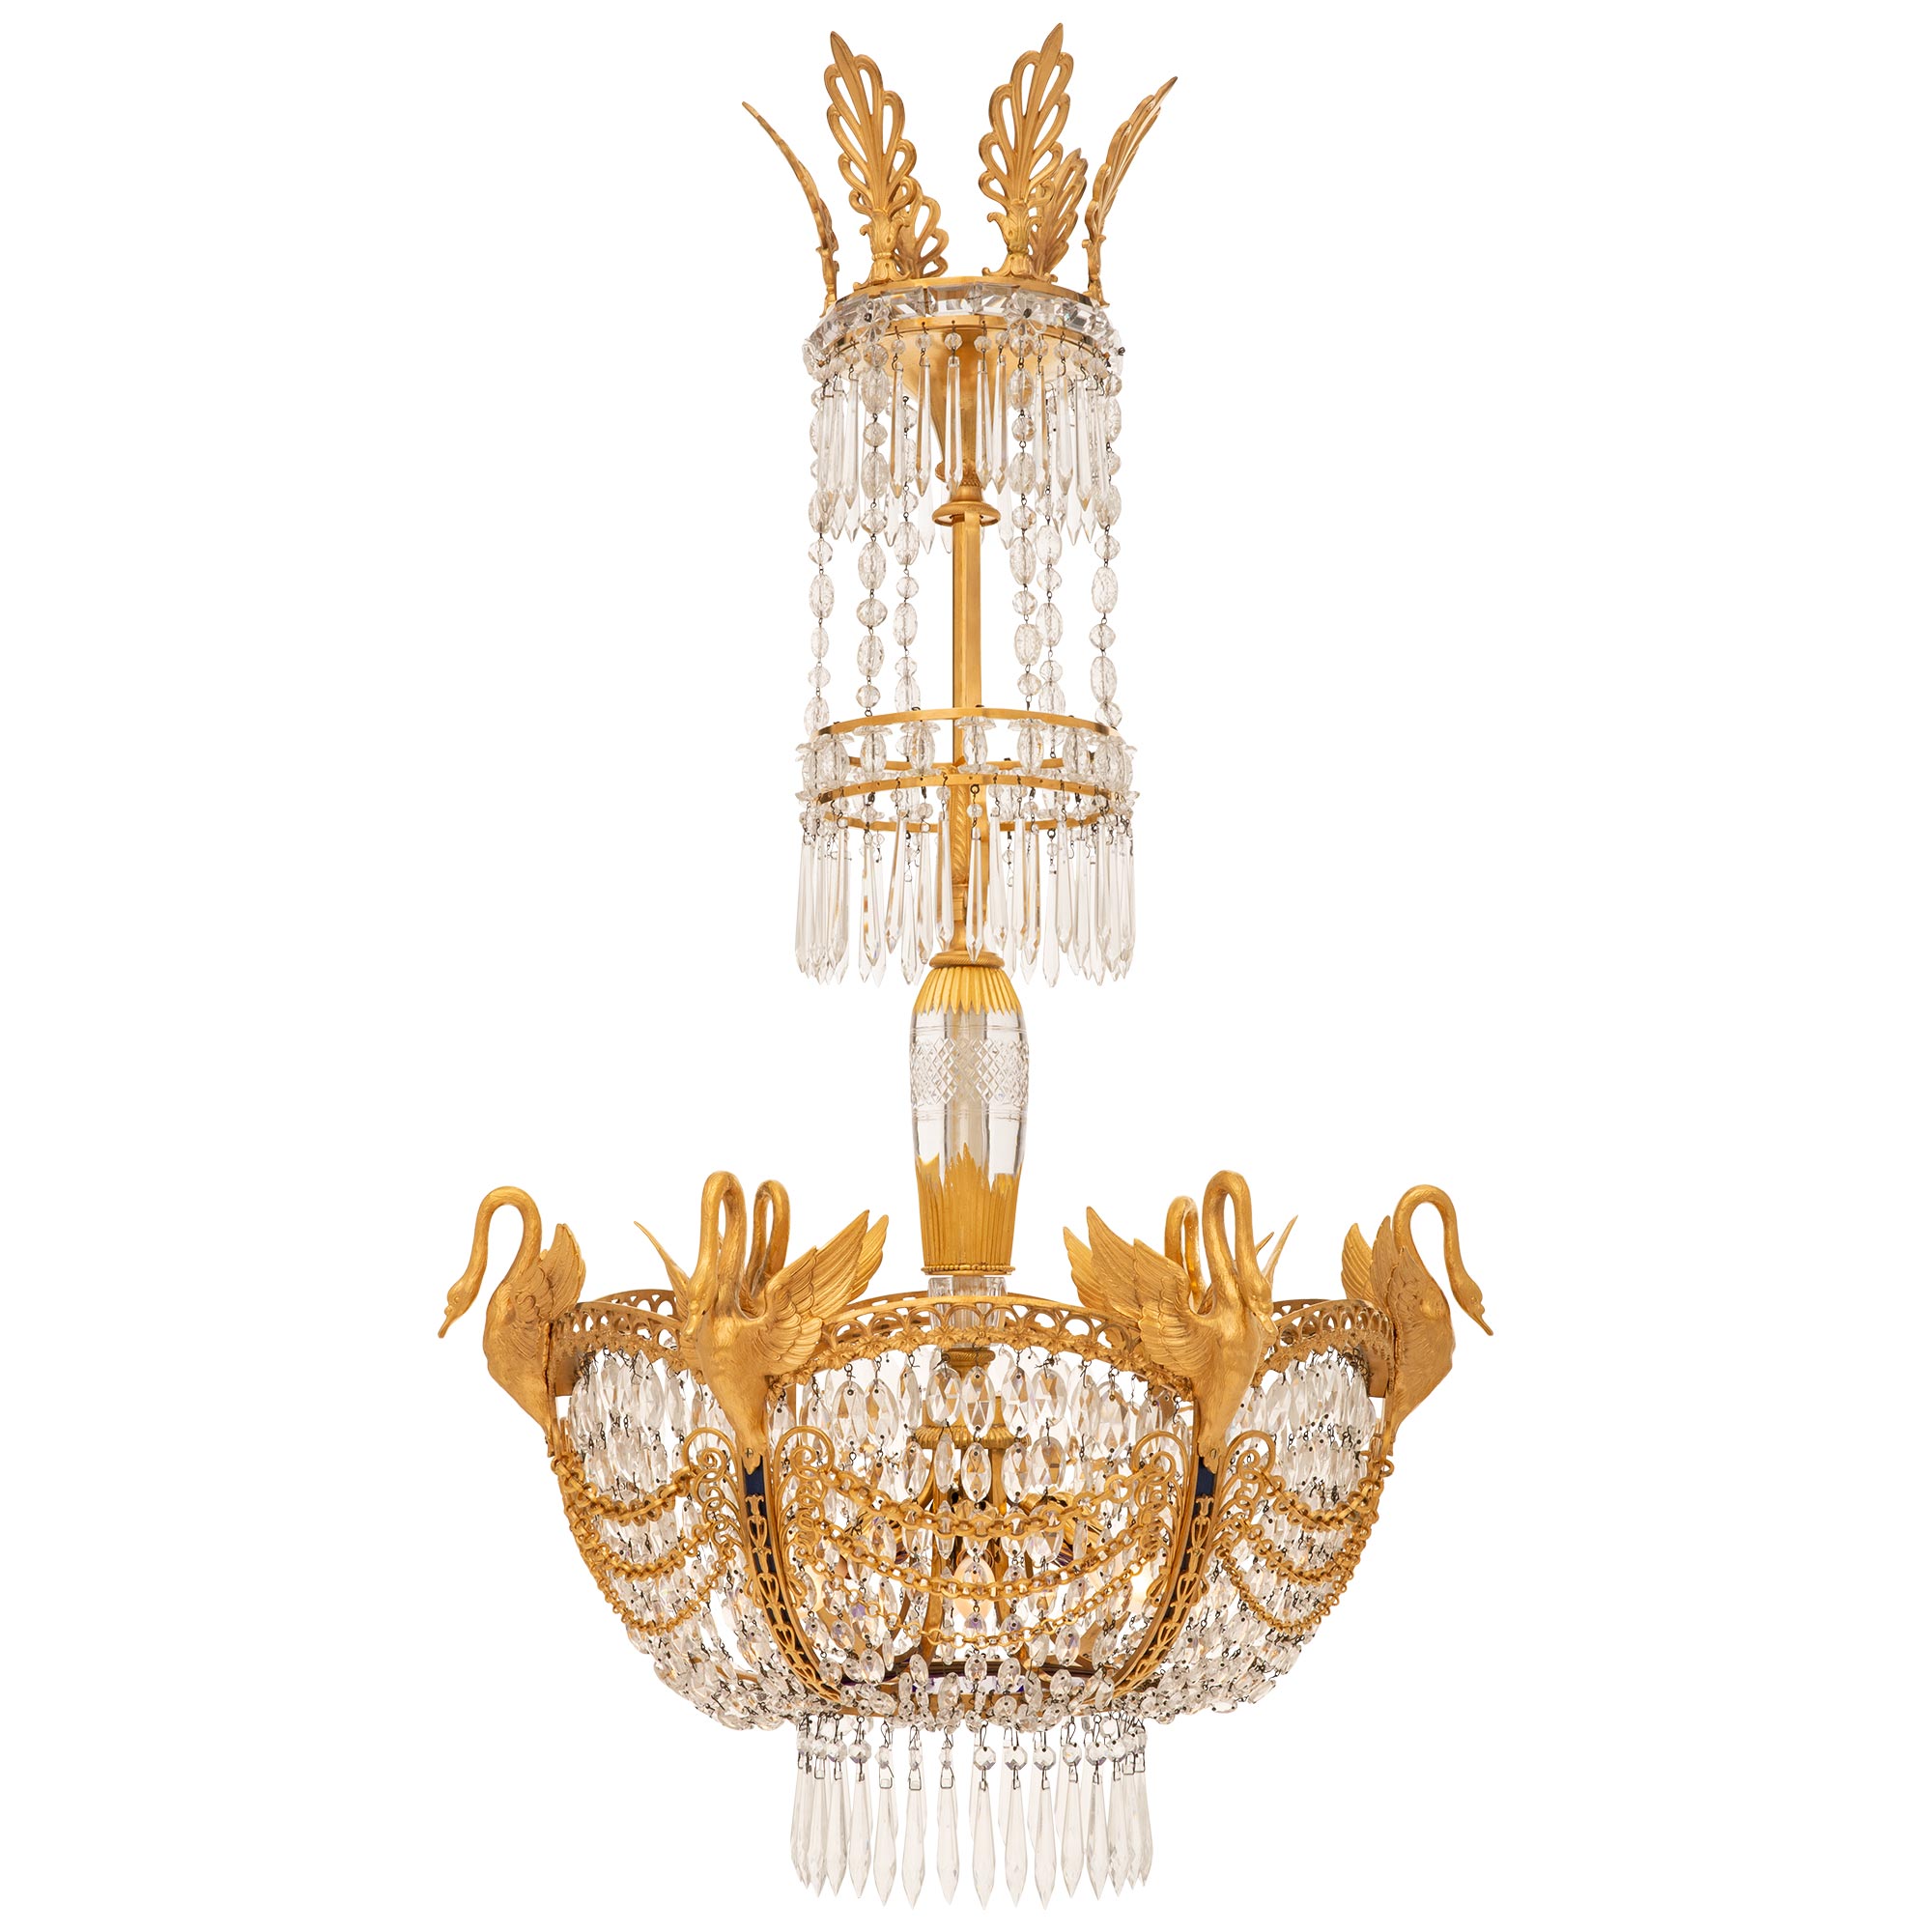 Russian 19th c. Neo-Classical St. Crystal, Ormolu, Bronze & Glass Chandelier For Sale